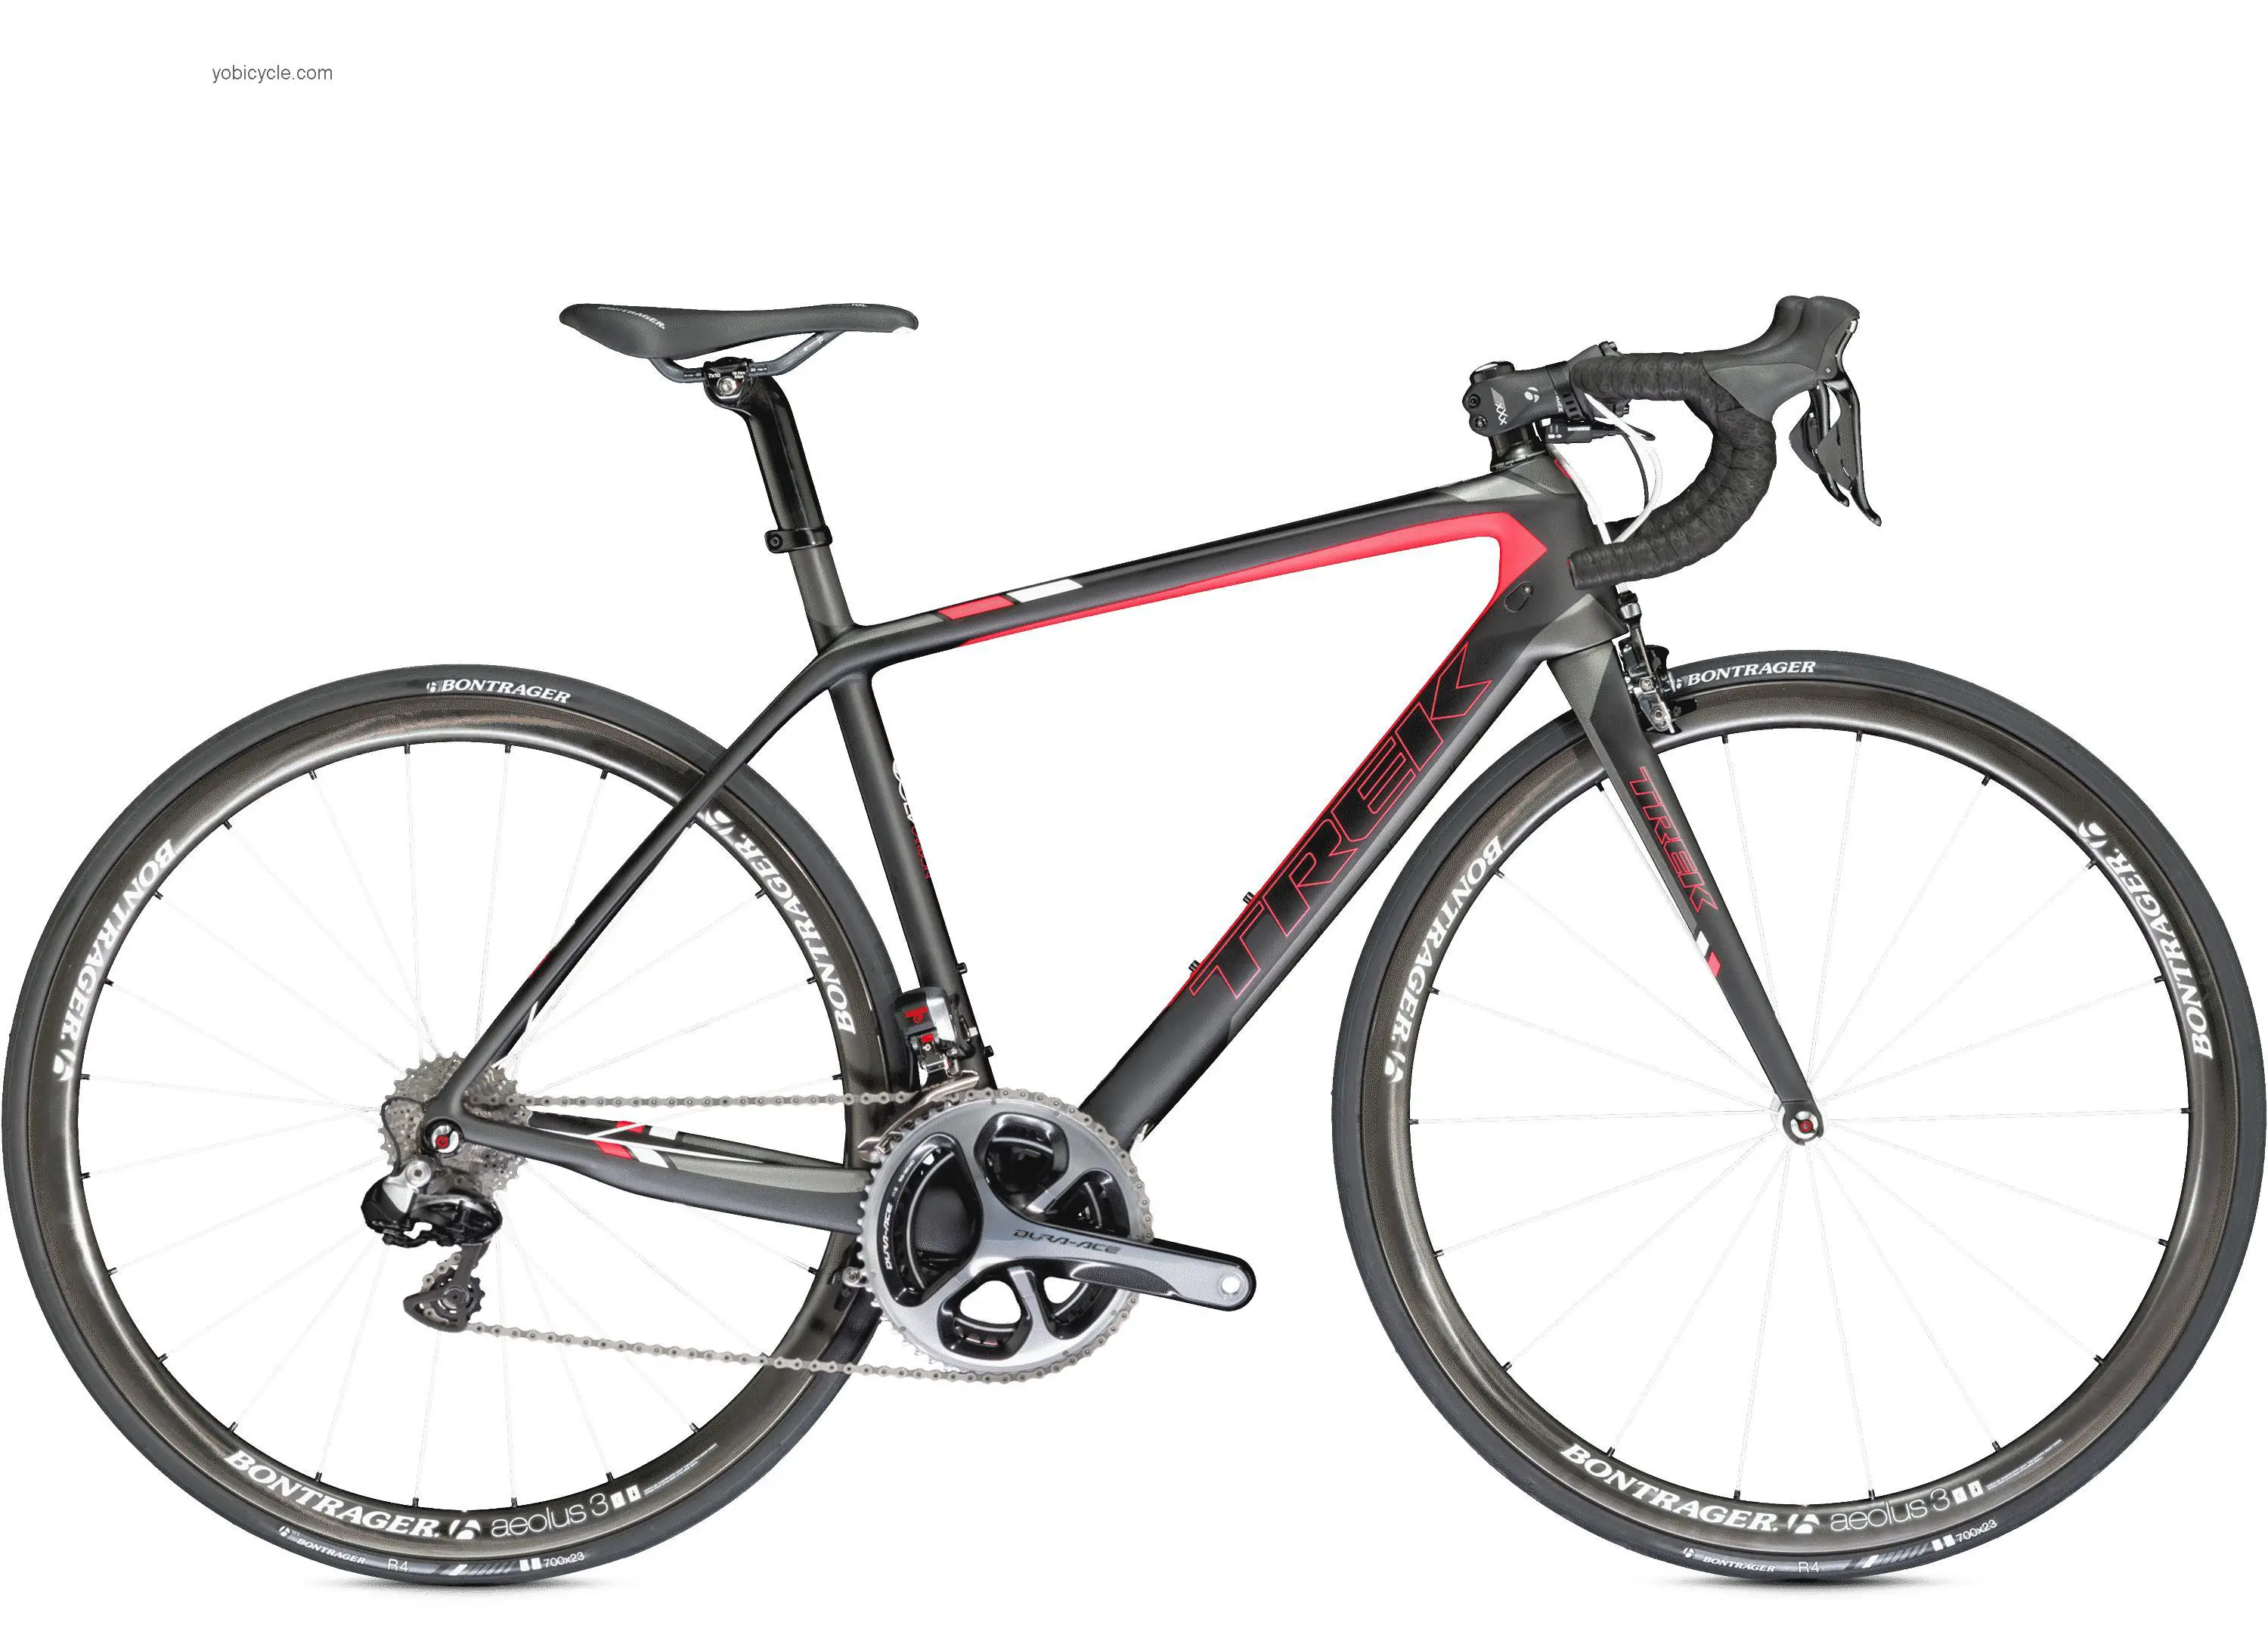 Trek Madone 7.9 WSD 2015 comparison online with competitors